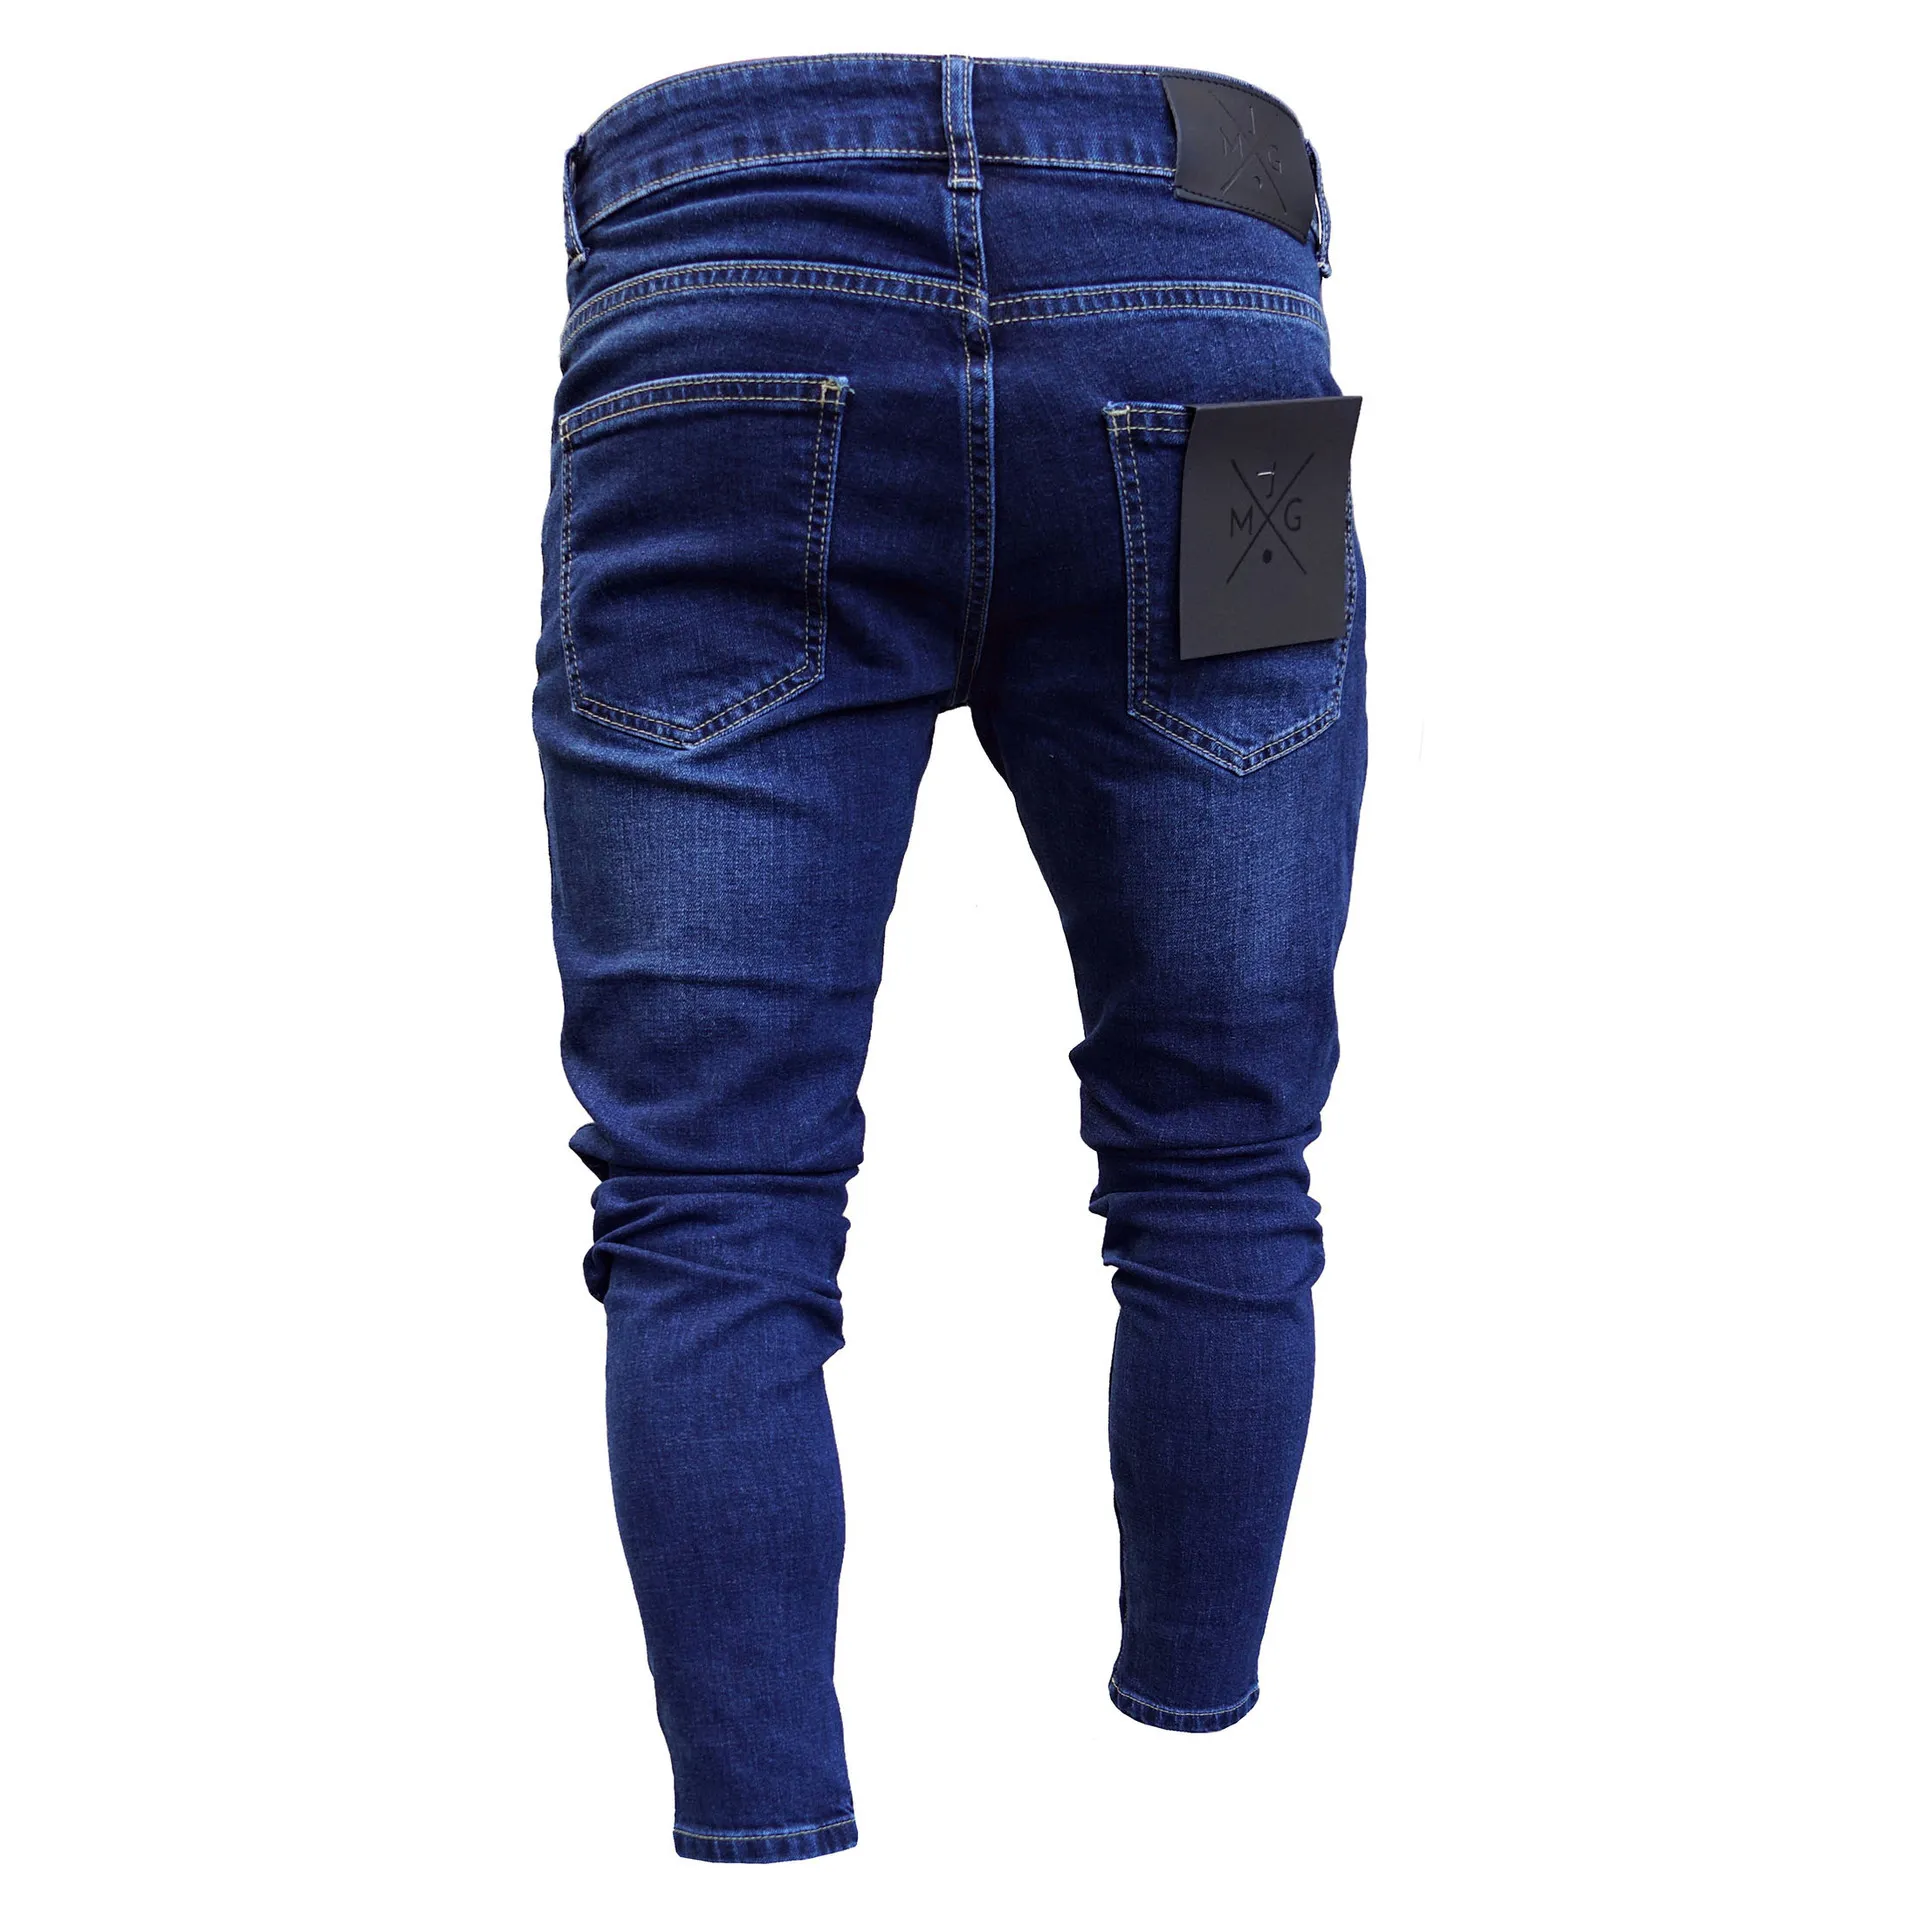 Men's Classic Blue Dark-Washed Regular Fit Joggers Jeans